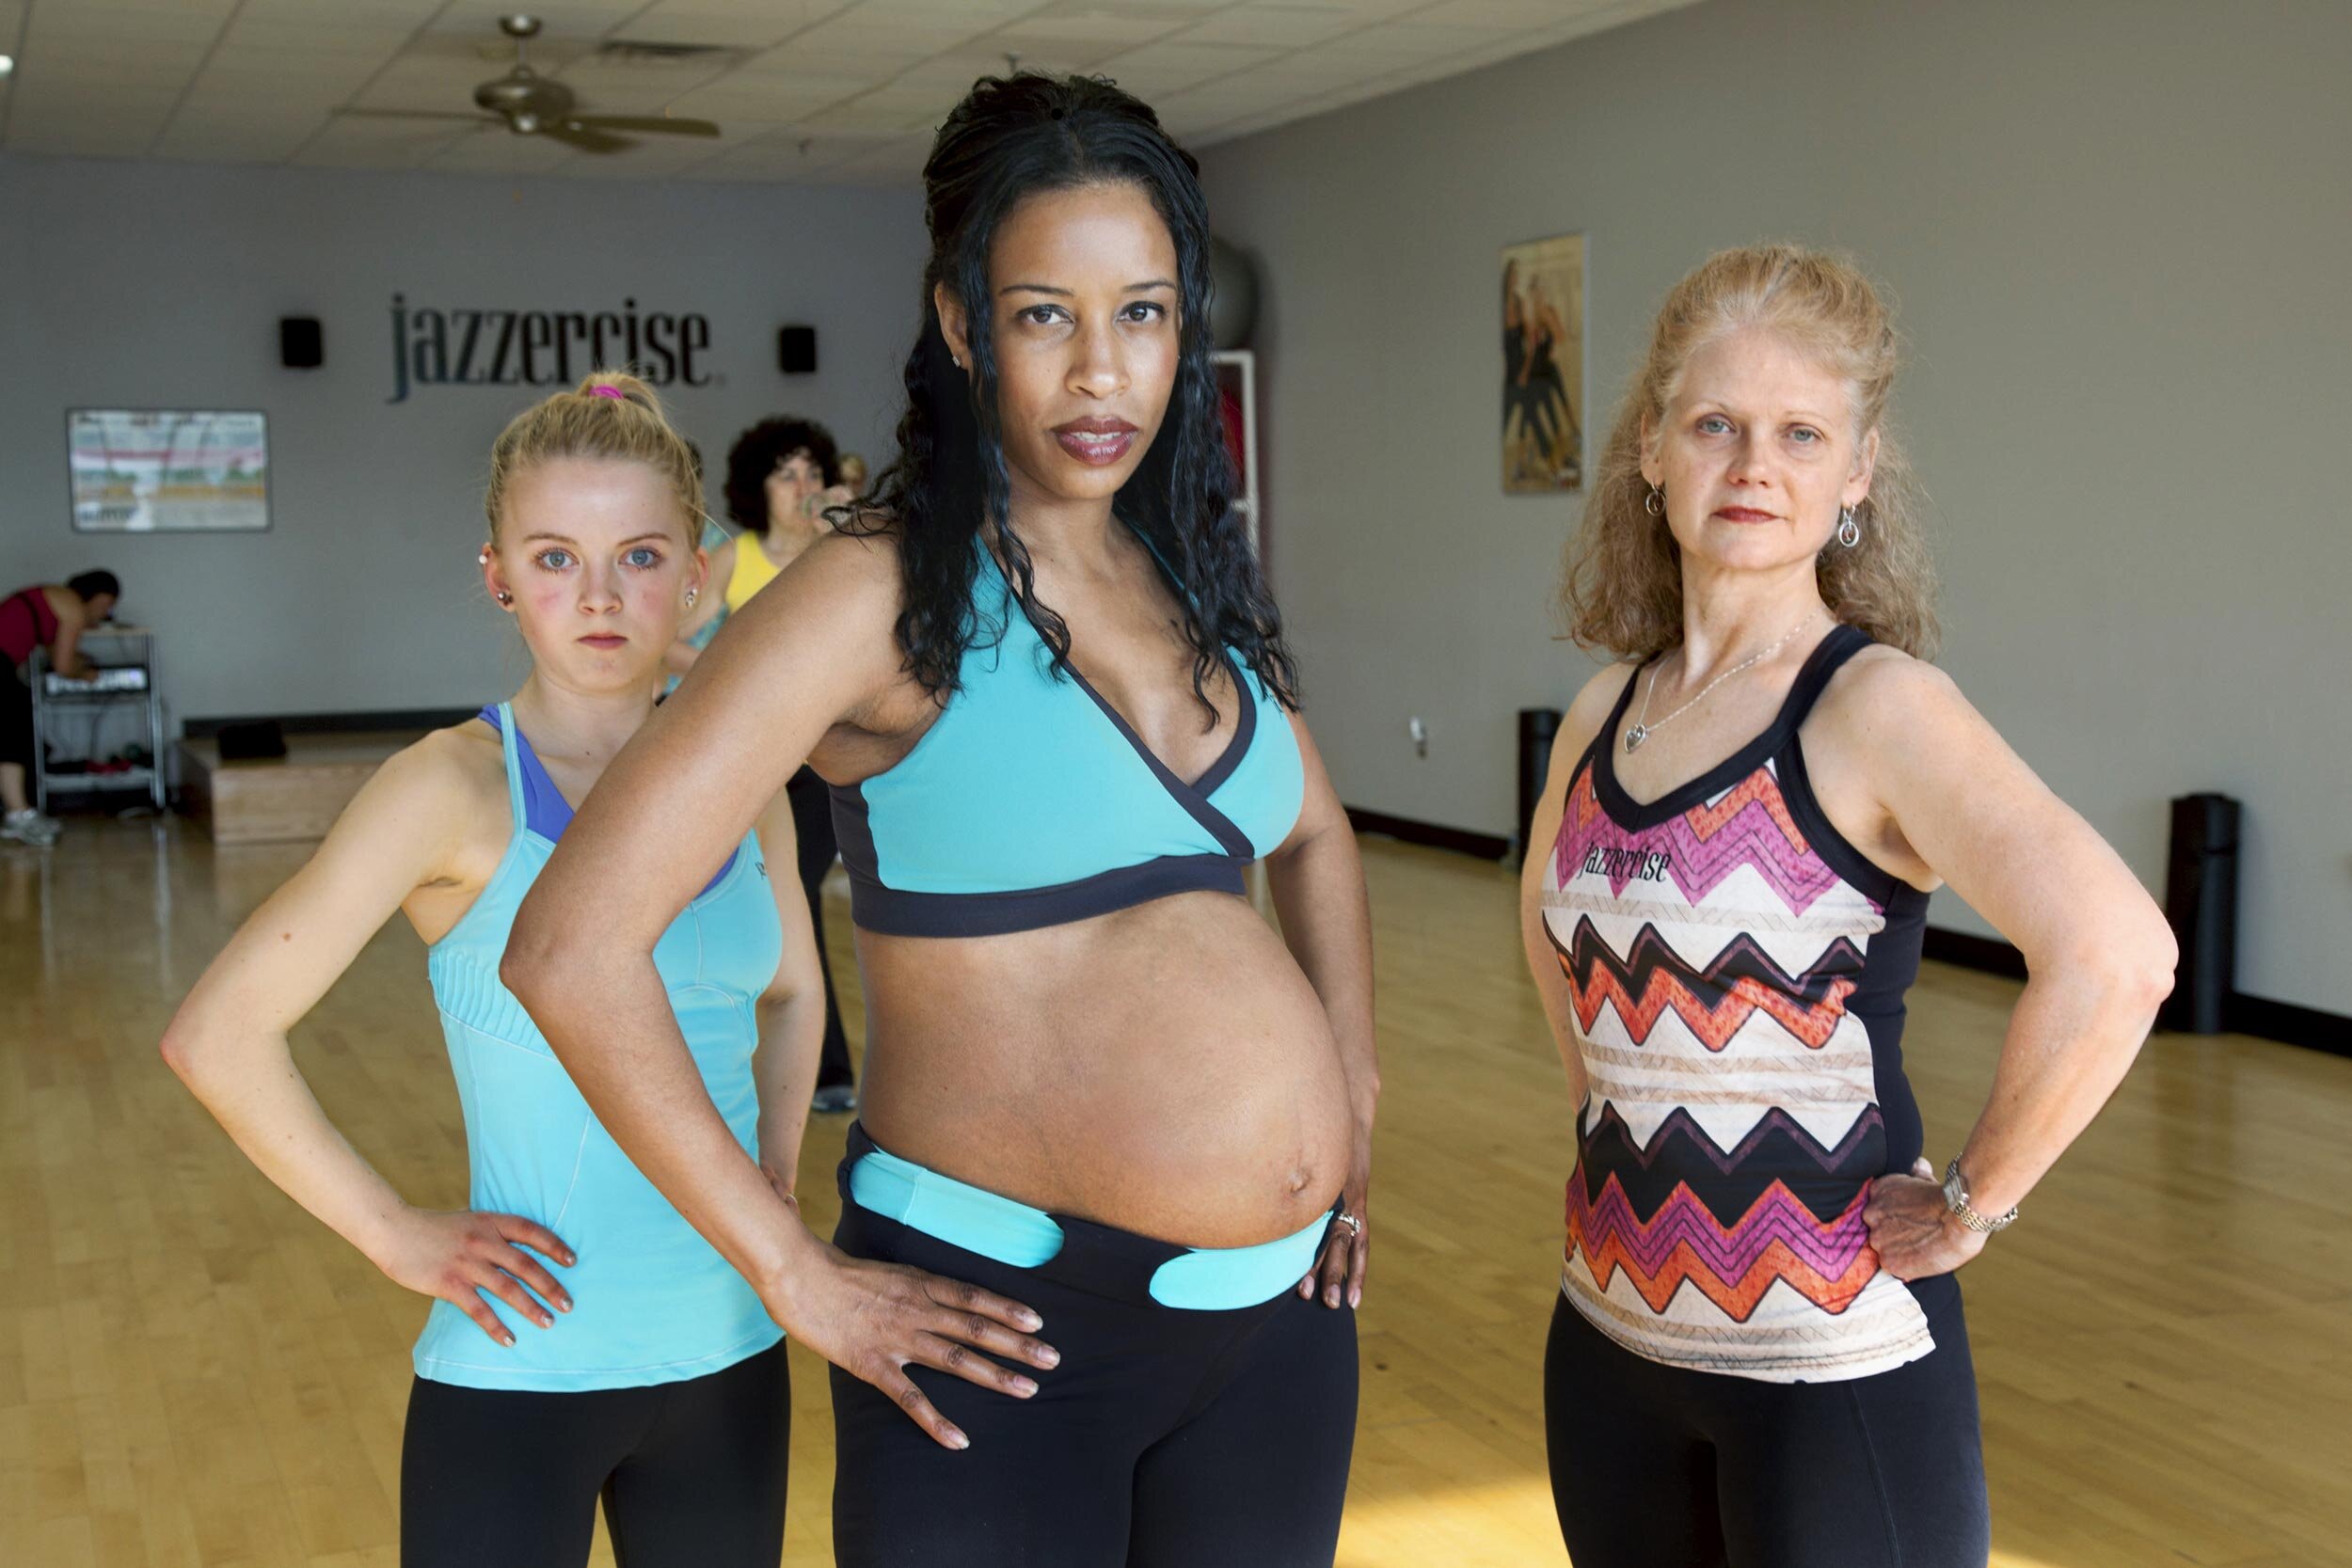 Alicia, Jazzercise Instructor — Showing: Pregnancy in the Workplace